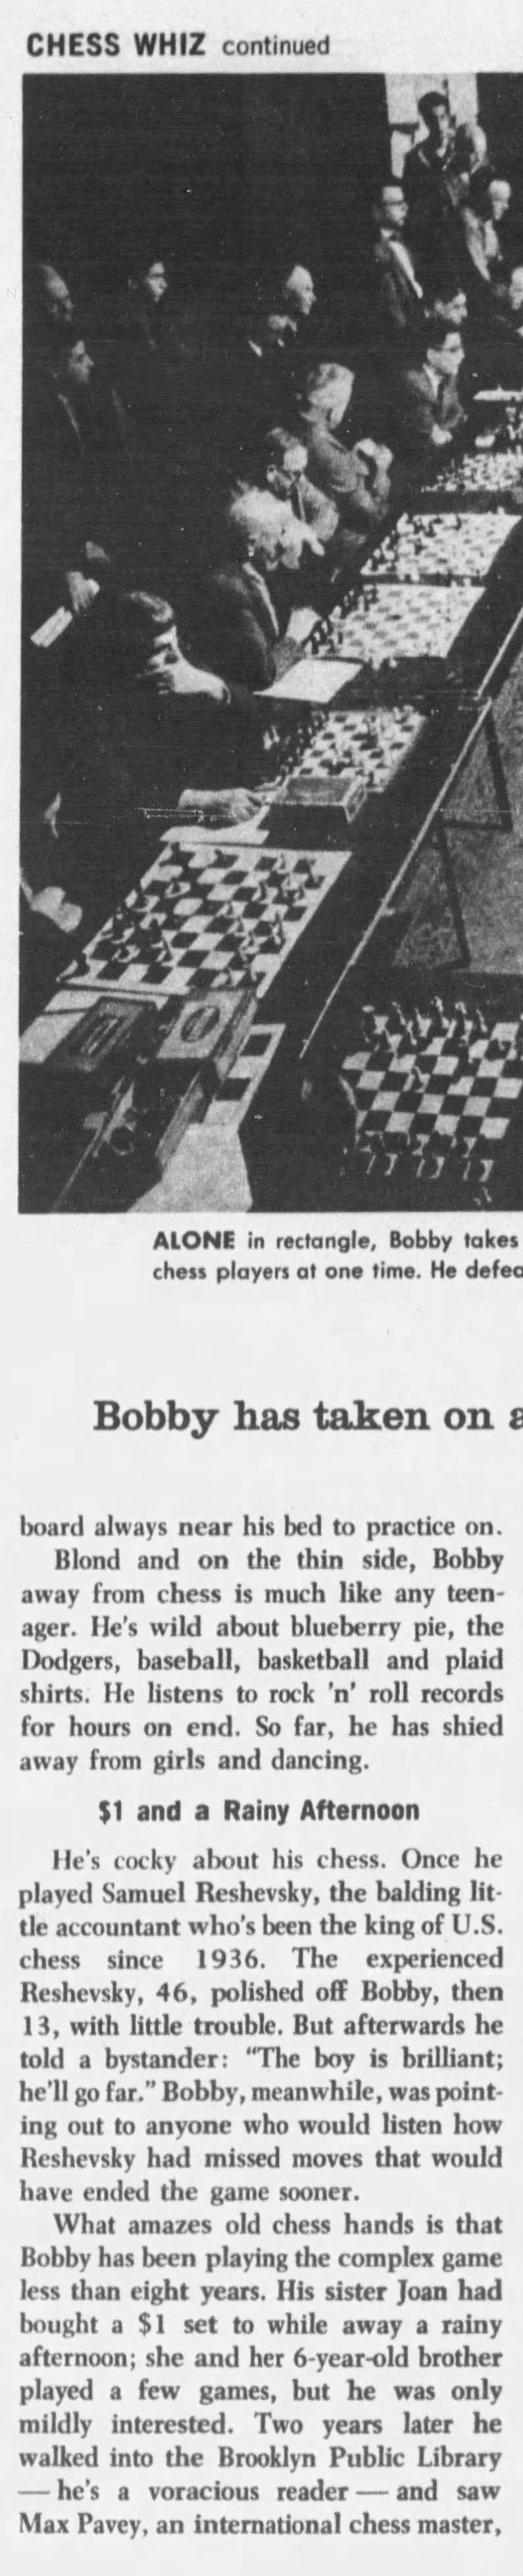 Only 14, he's a chess whiz (Column 4)